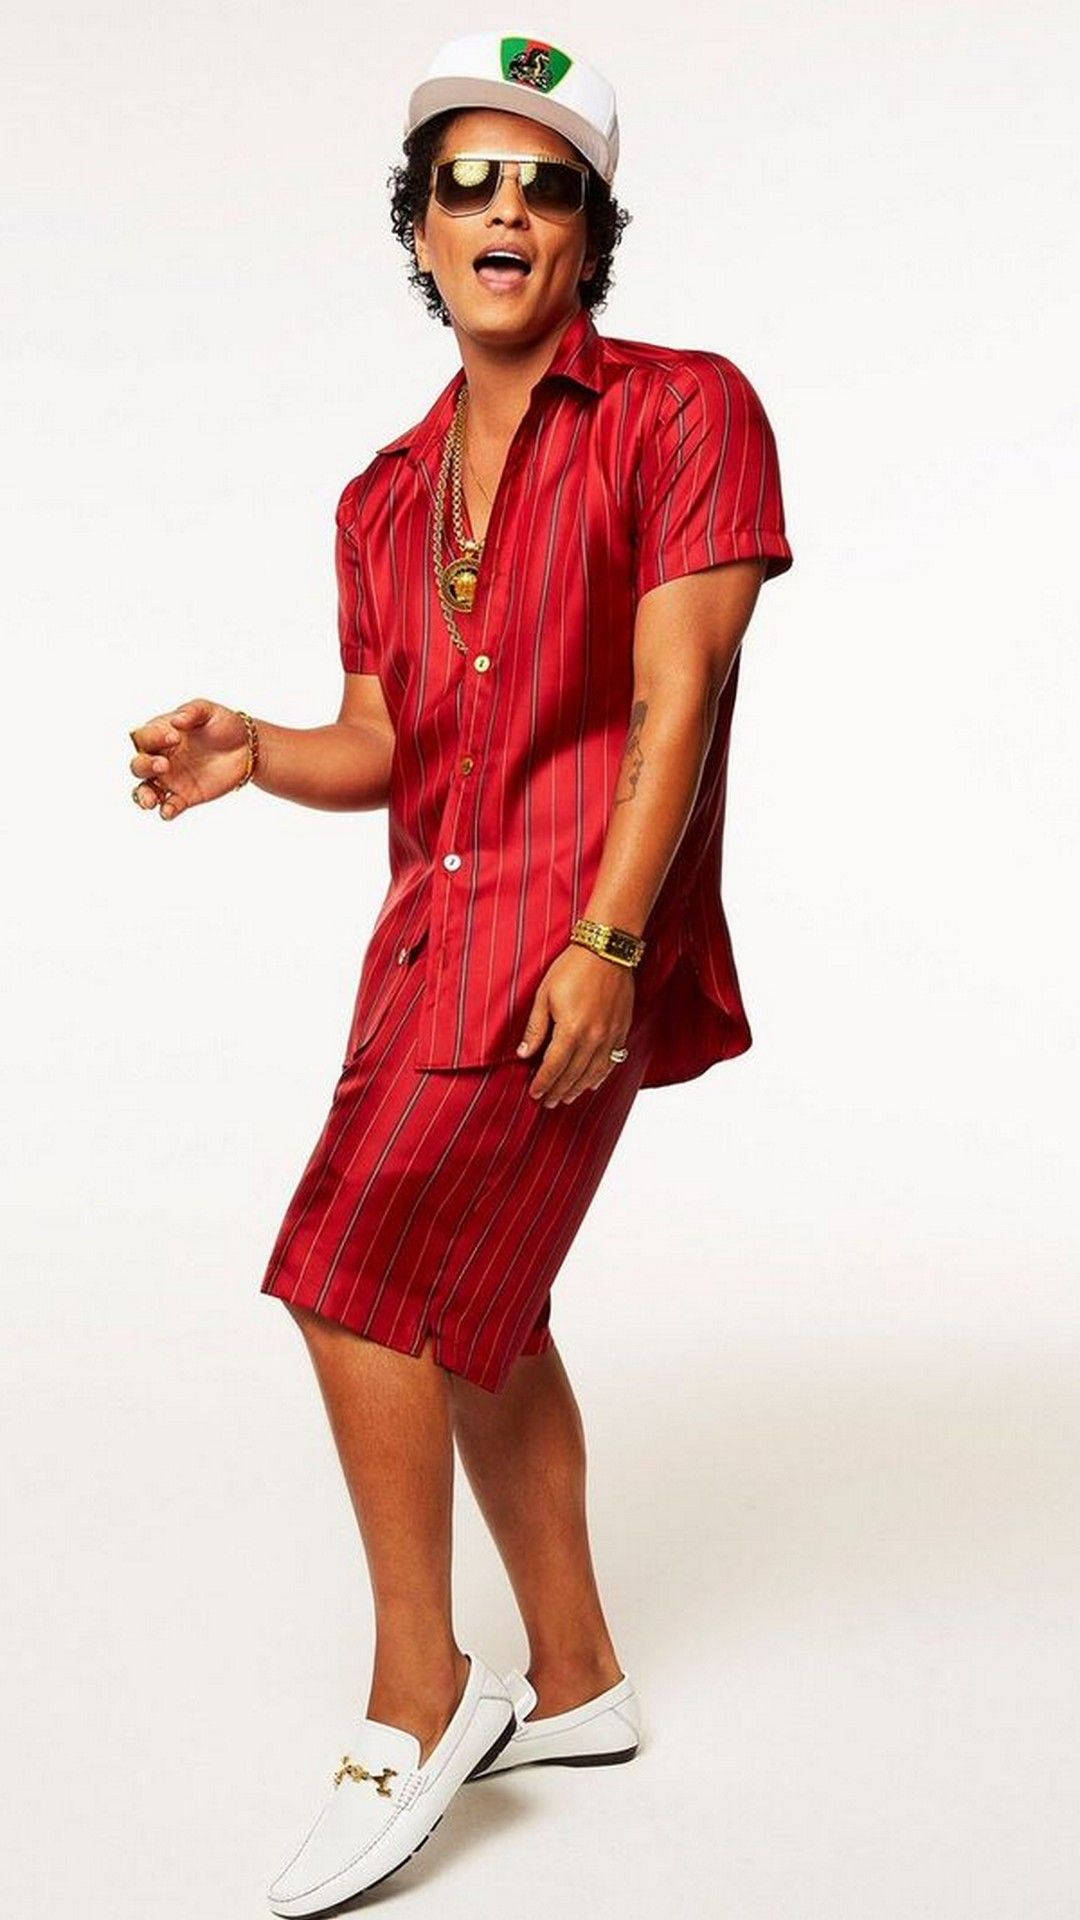 1080X1920 Bruno Mars Wallpaper and Background